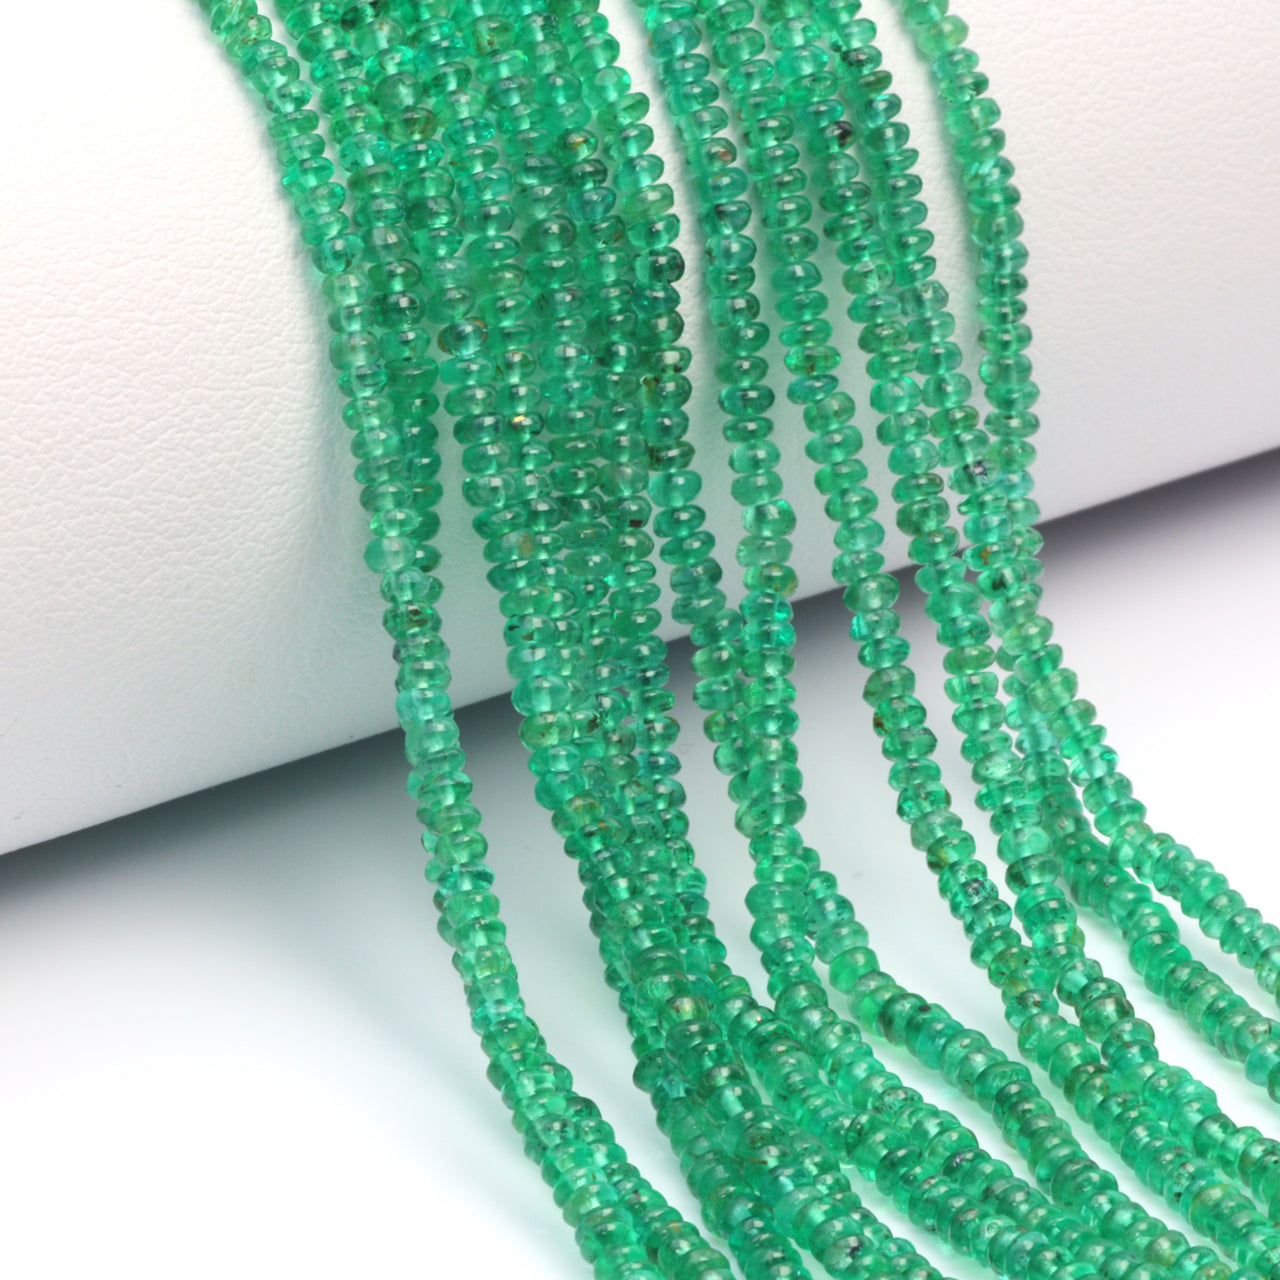 Green Emerald 2mm Smooth Rondelles